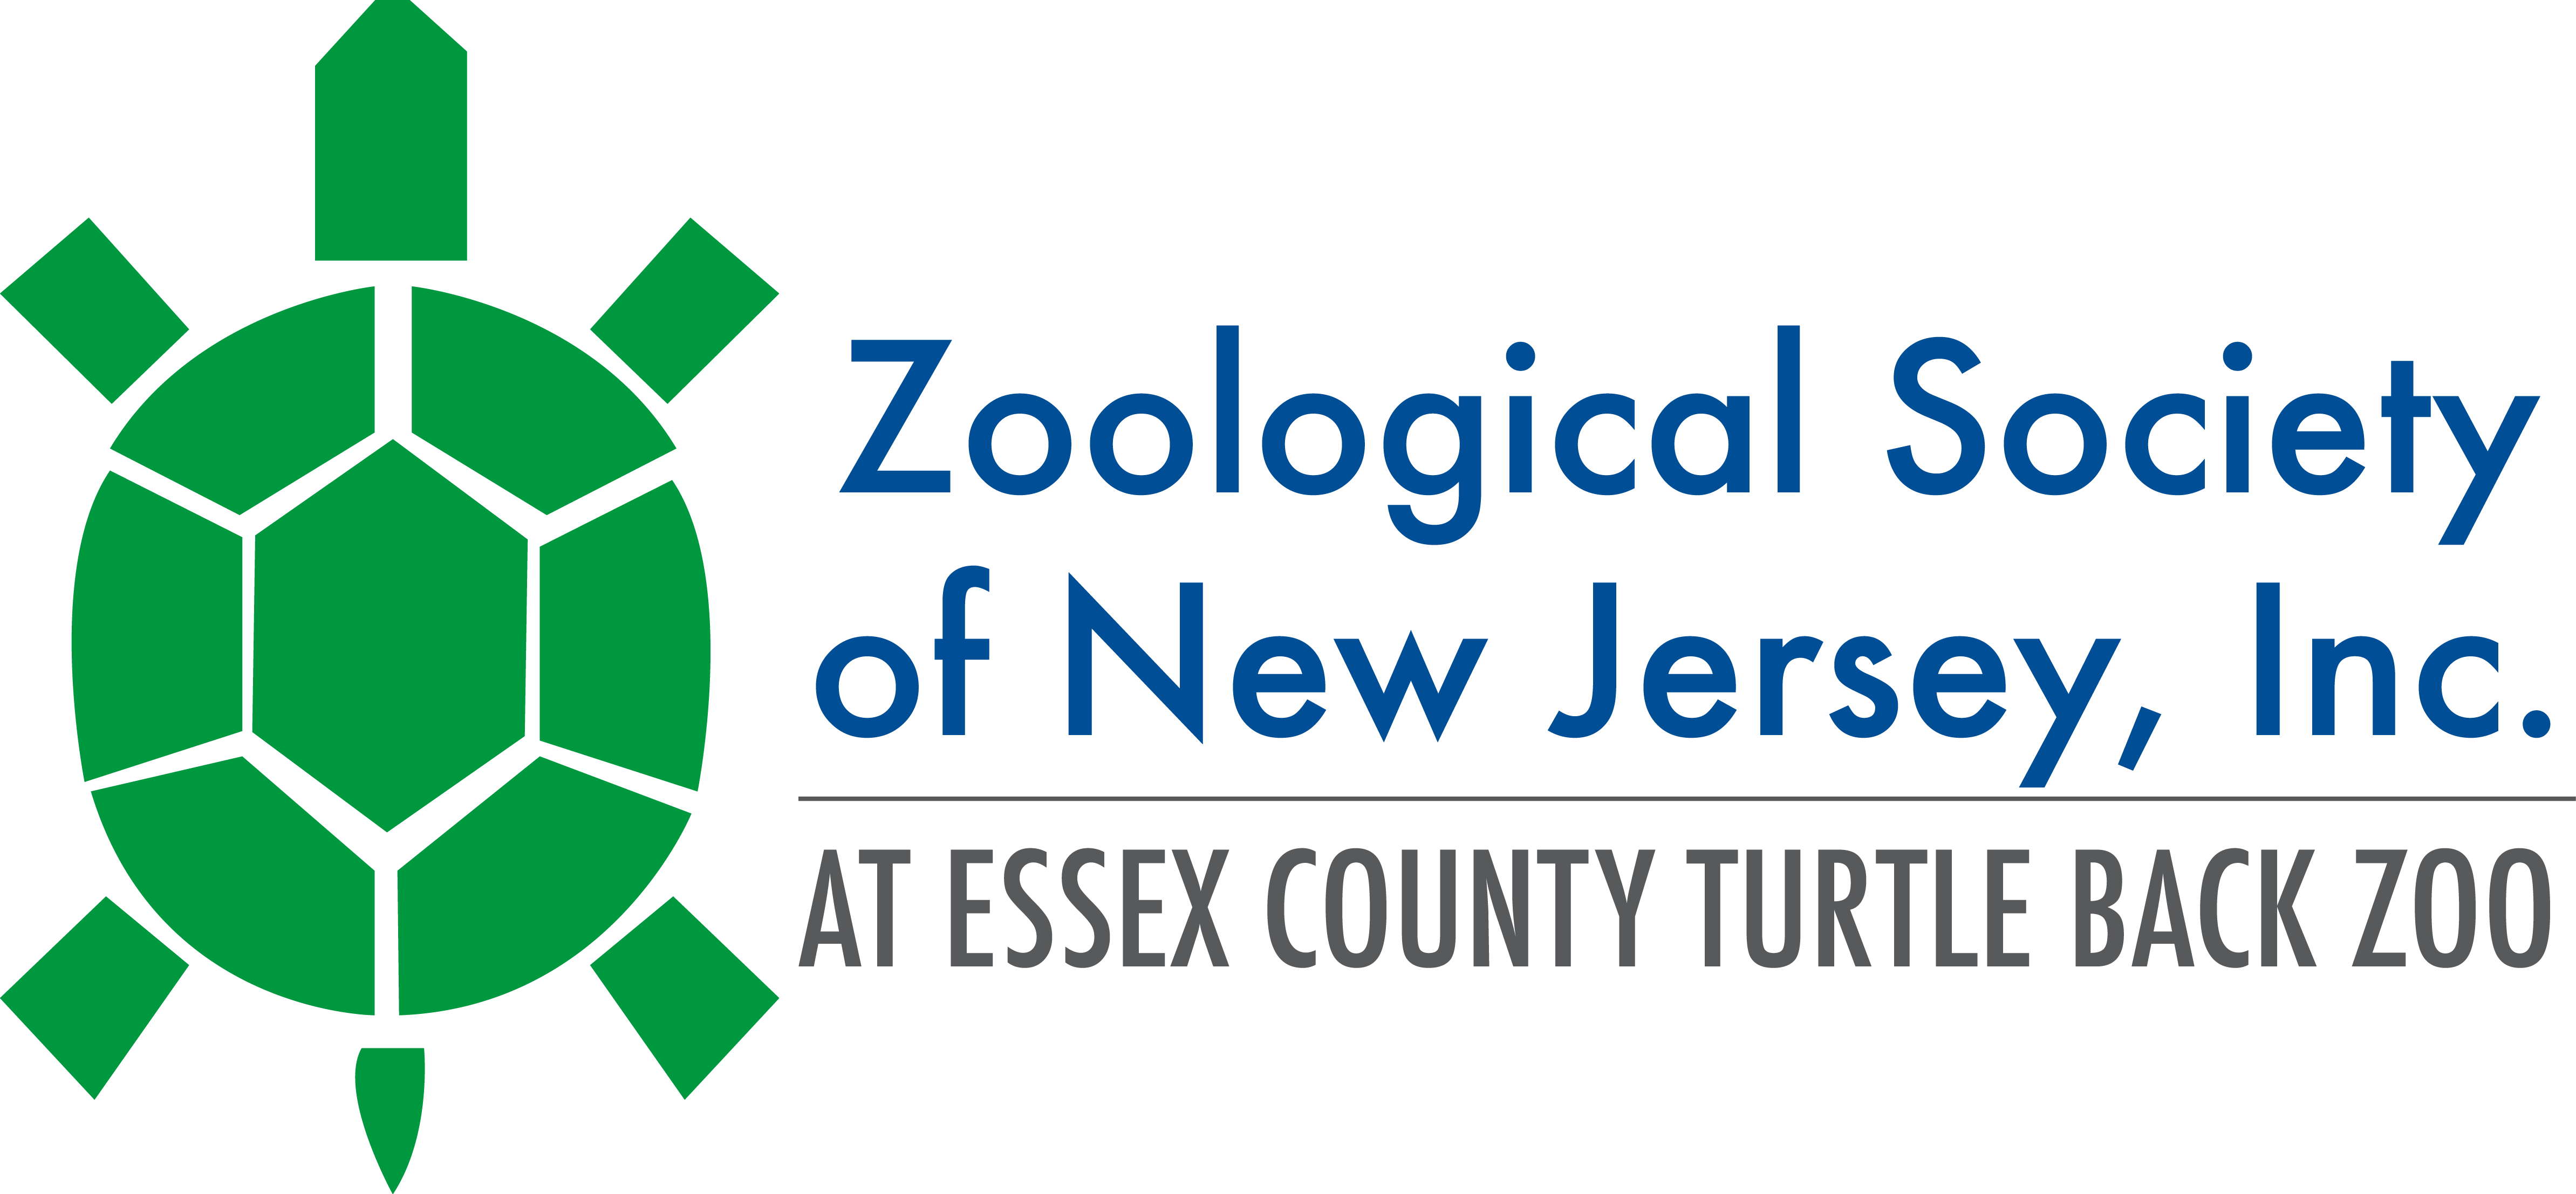 Zoological Society of New Jersey